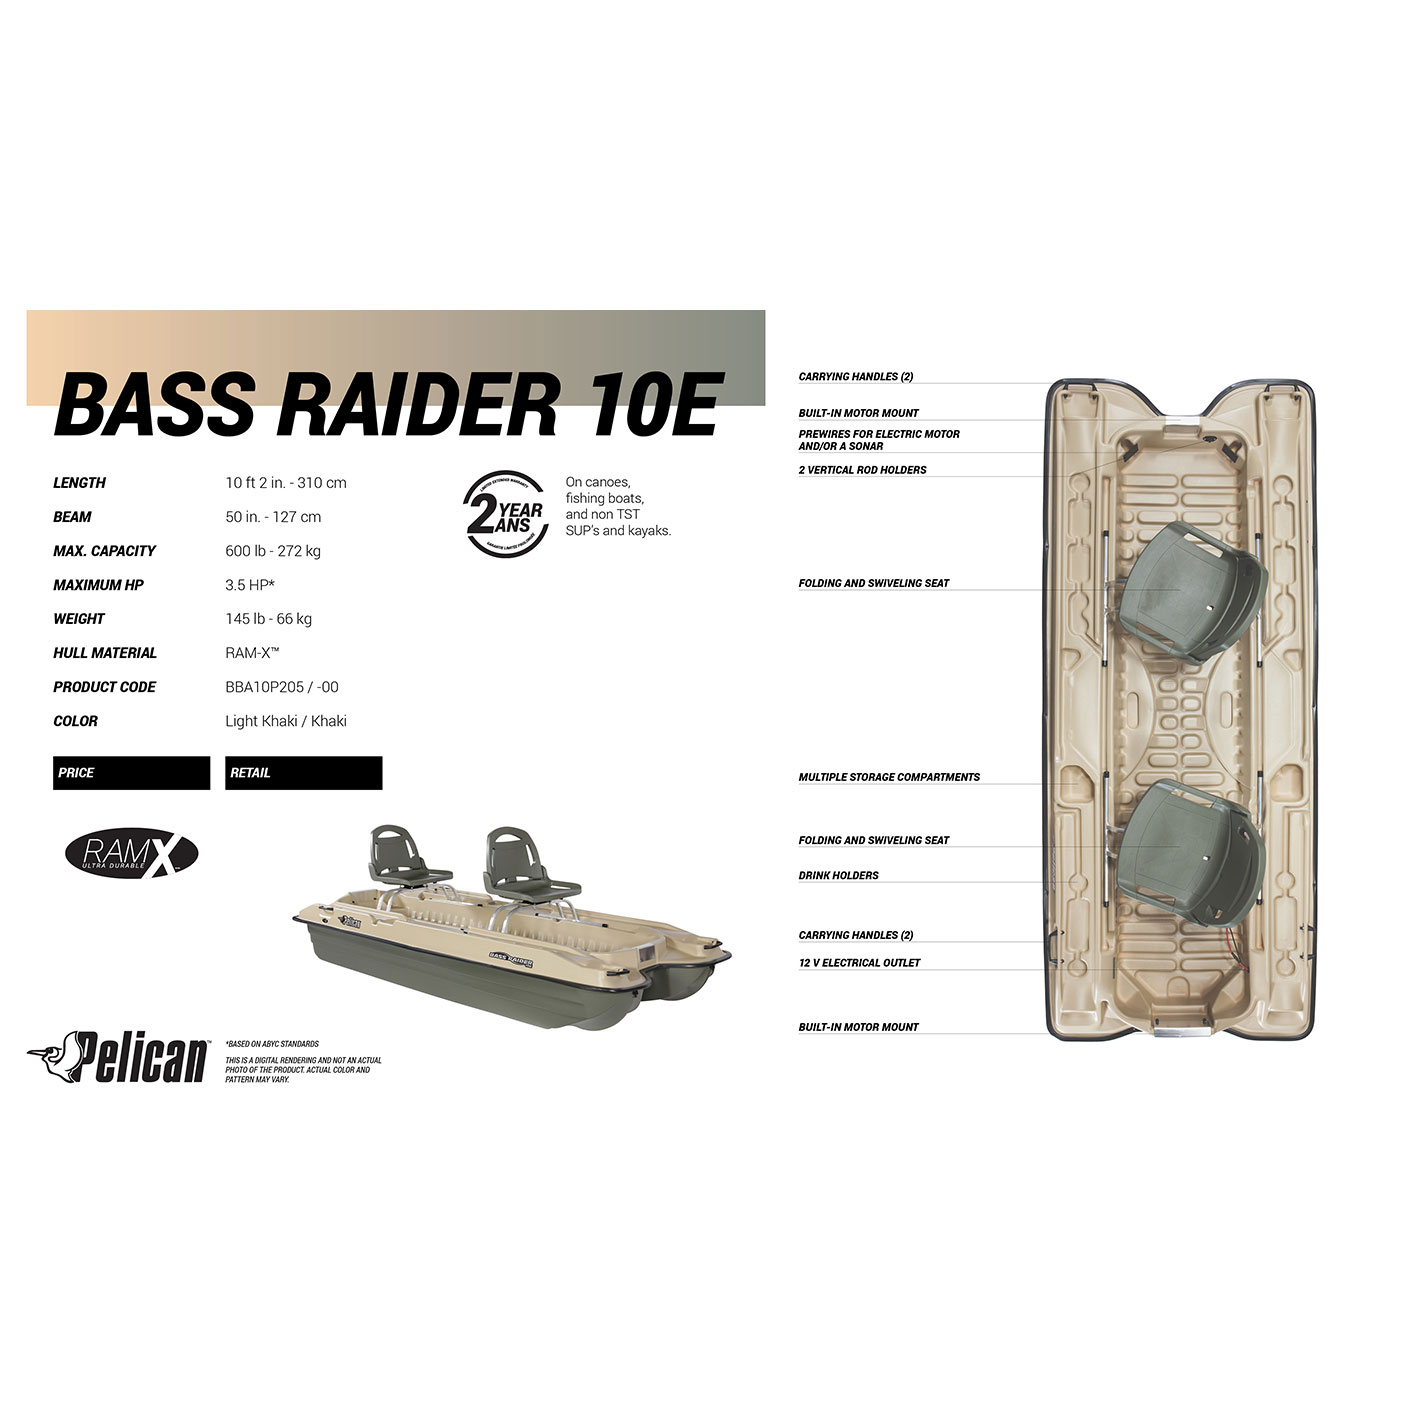 Pelican - Bass Raider Boat - 2 person Fishing Boat - 10 ft - image 10 of 10